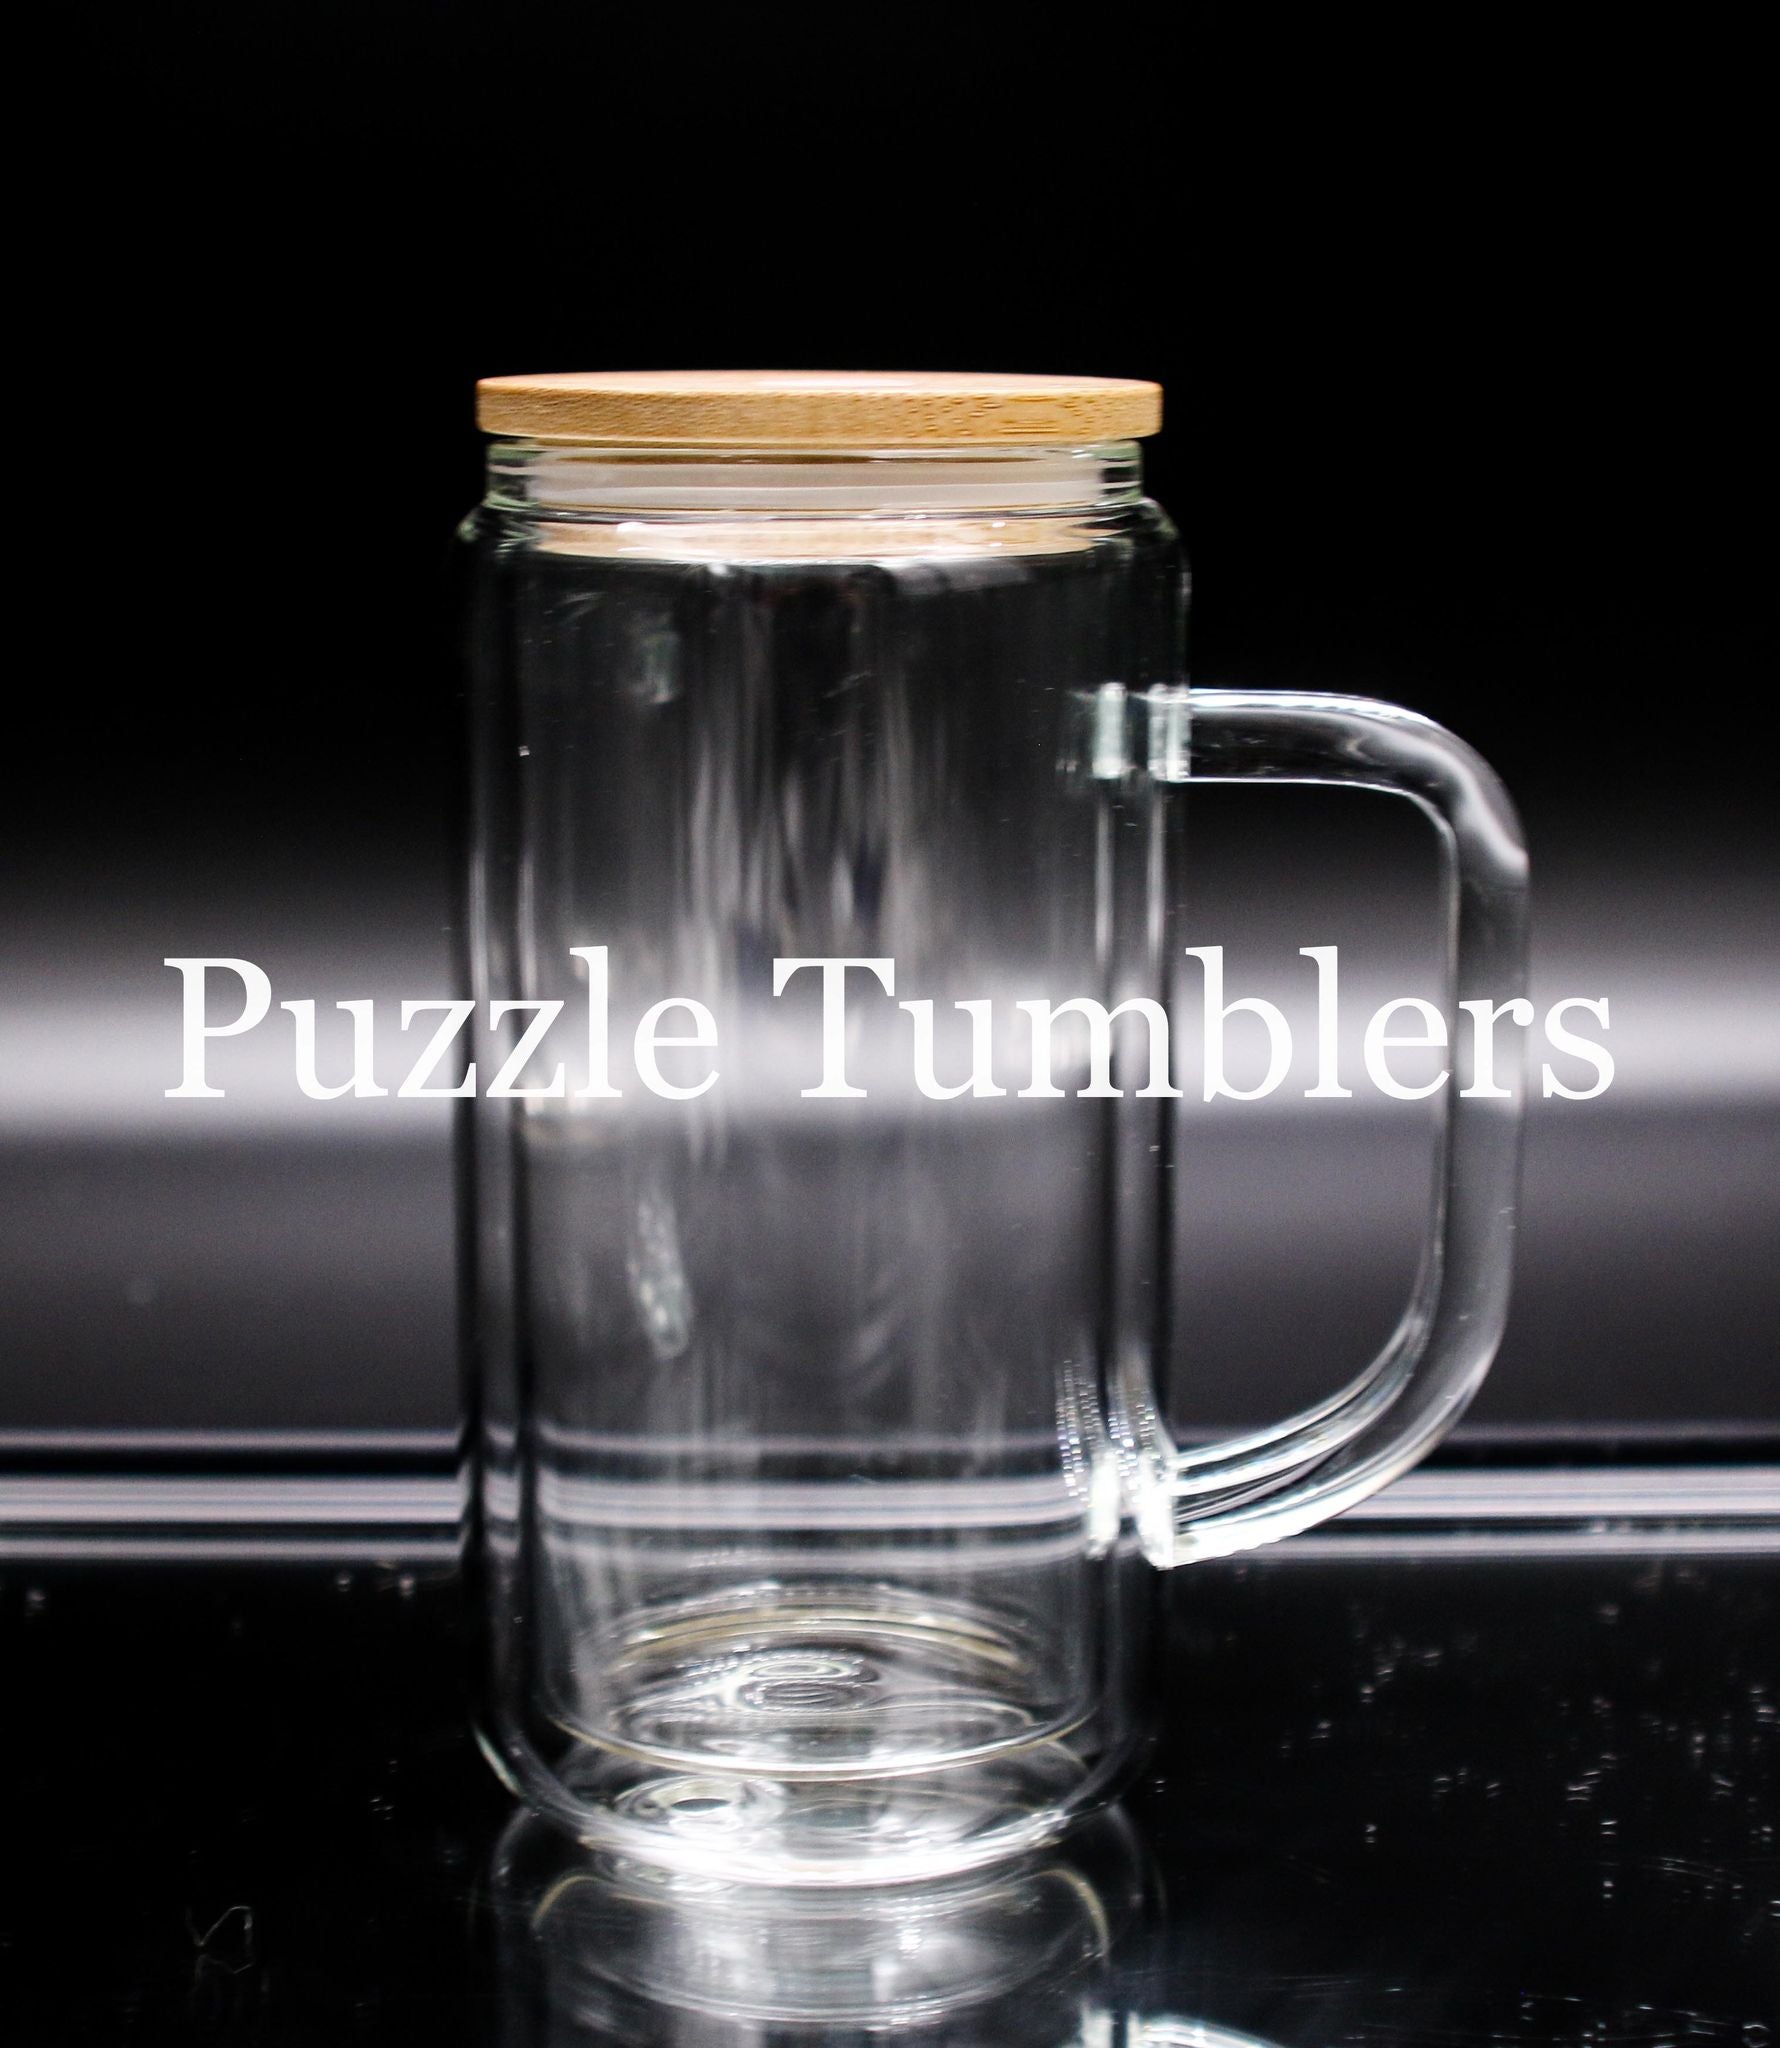 12oz Sublimation Clear Glass Can Tumbler